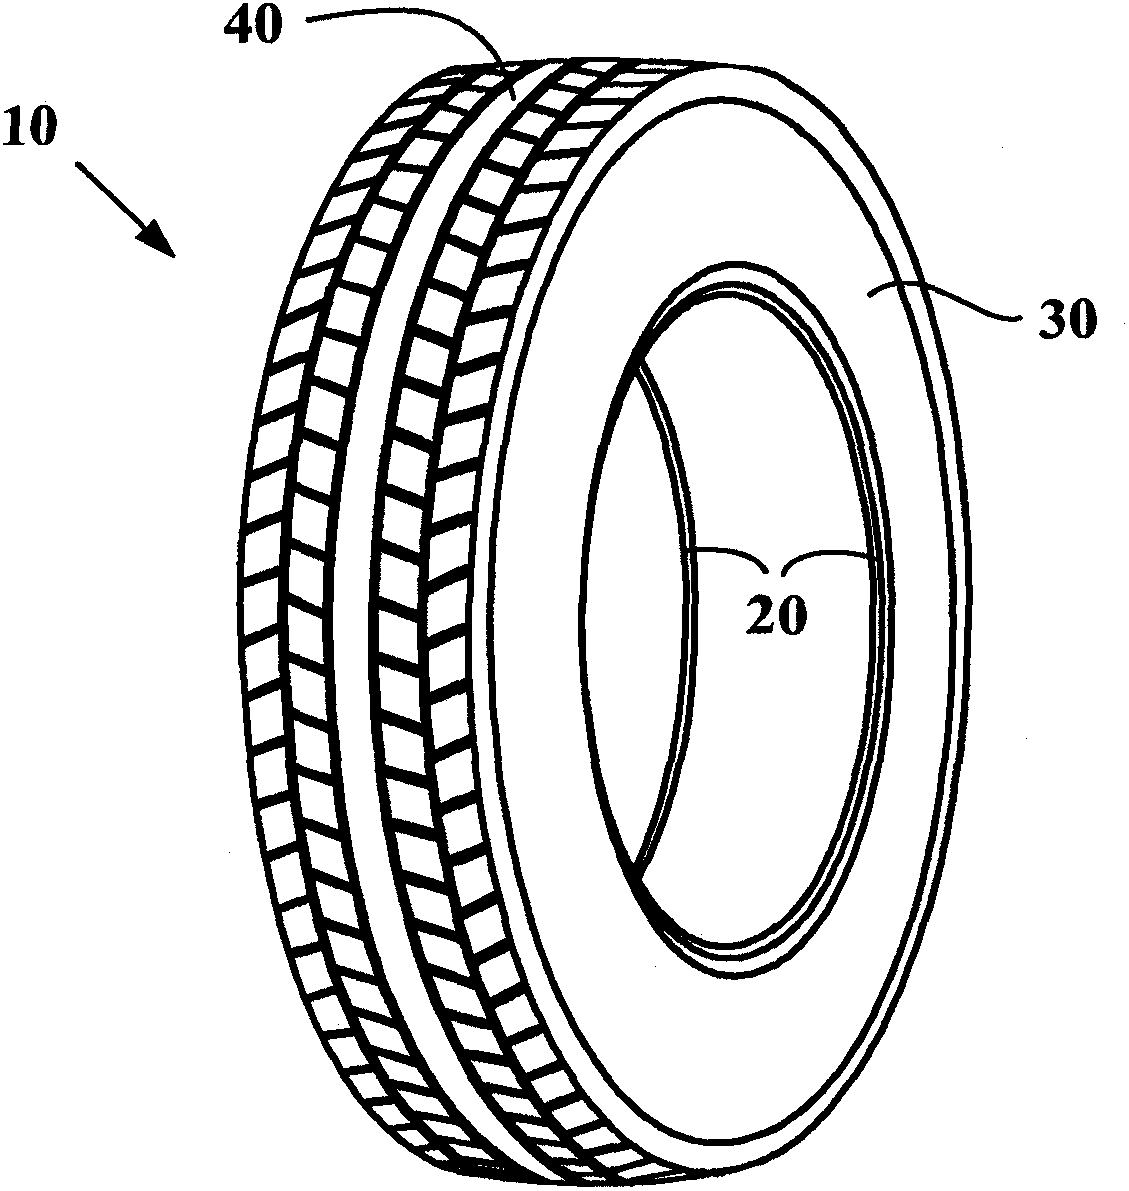 Tyre with improved beads